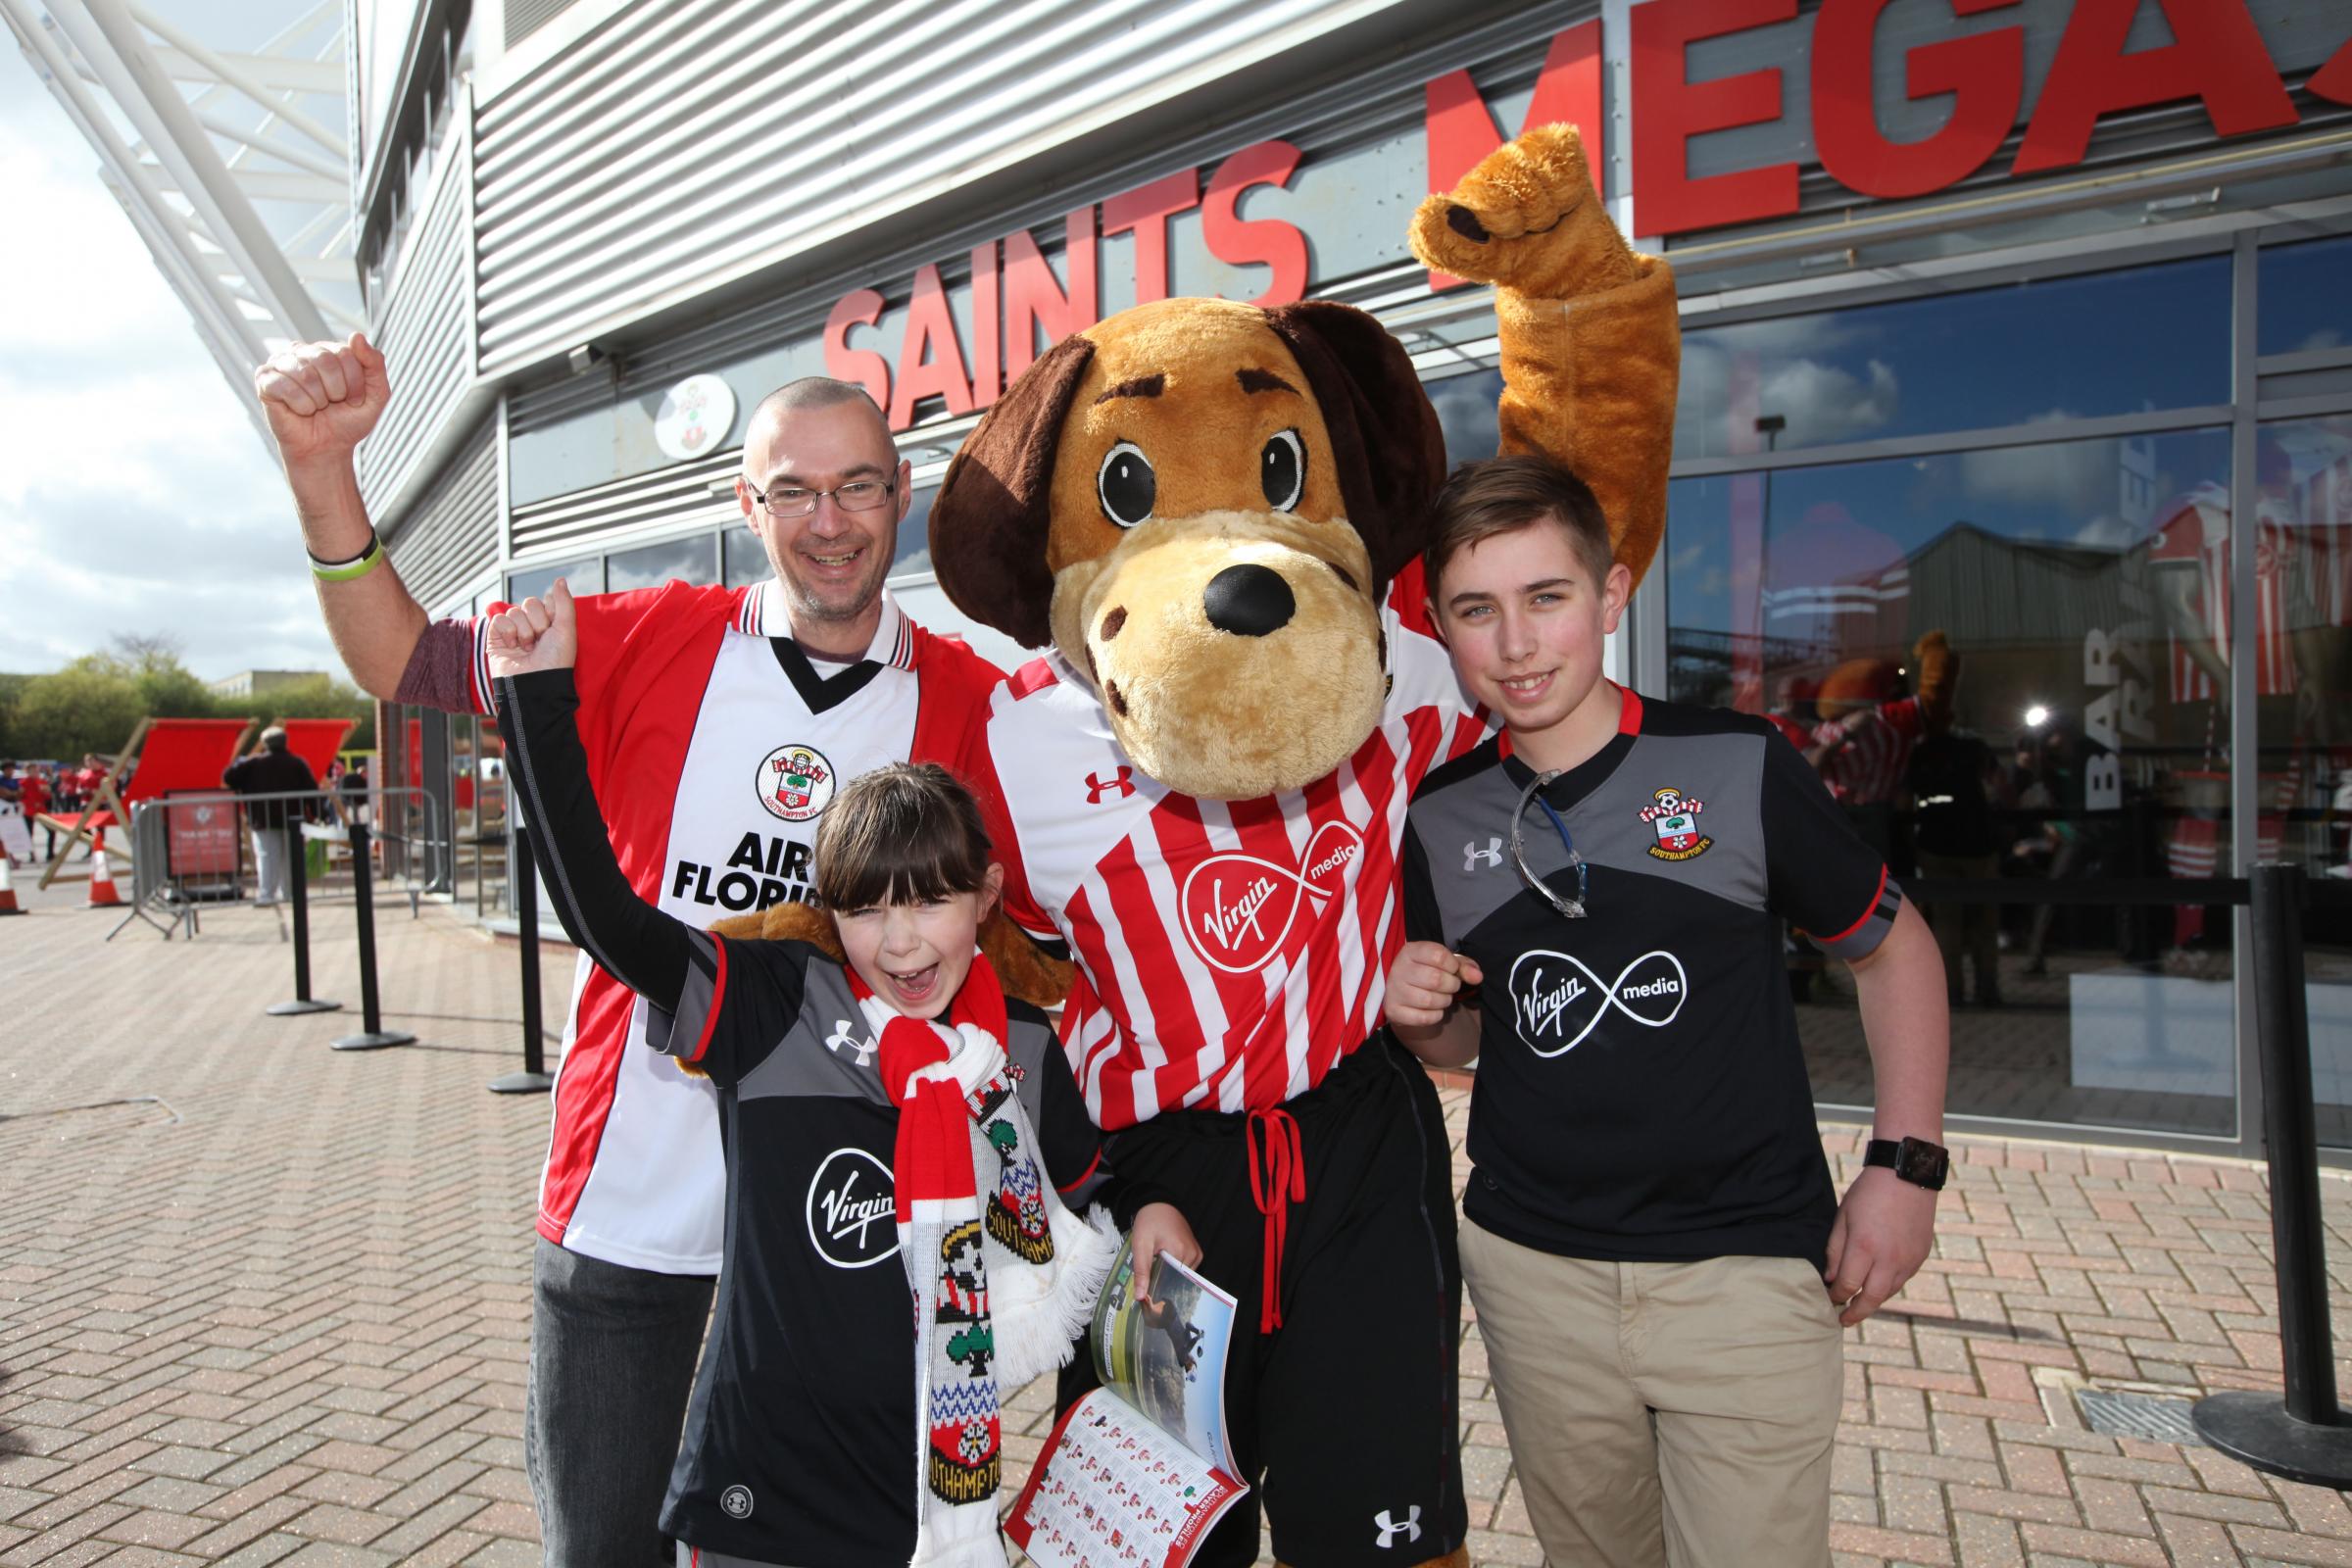 Southampton 0-0 Bournemouth - are you in our fan shots?